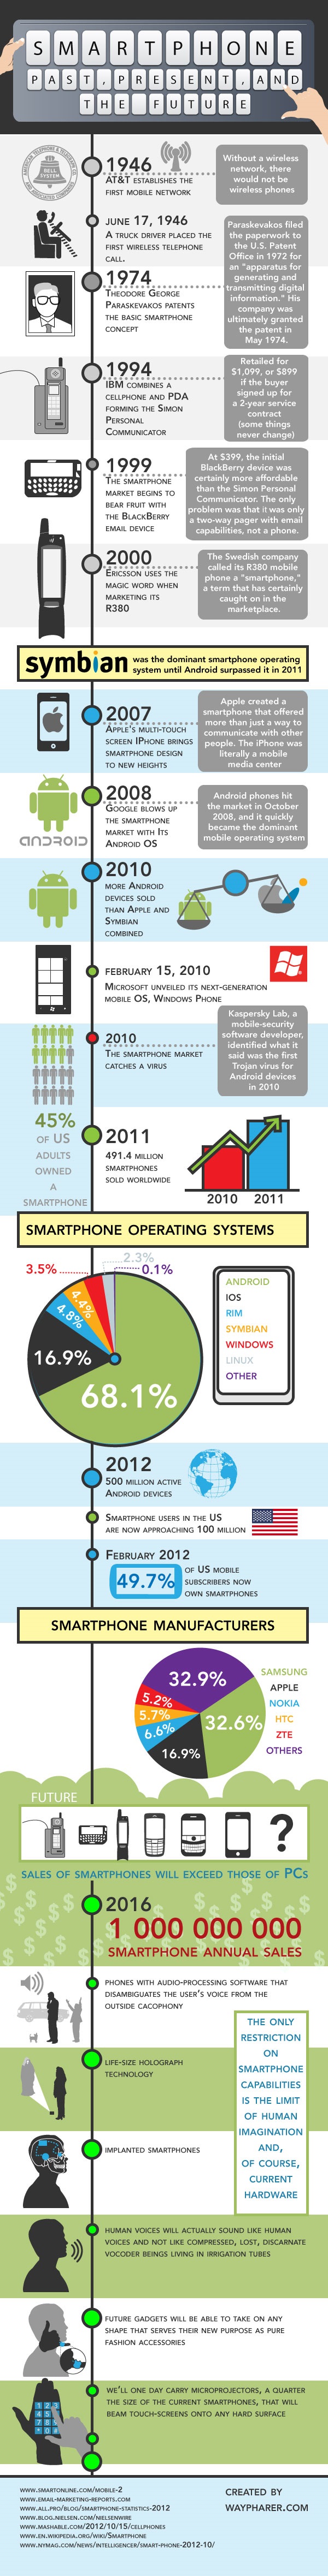 Amazing Story of the Evolution of Smartphones - Infographic